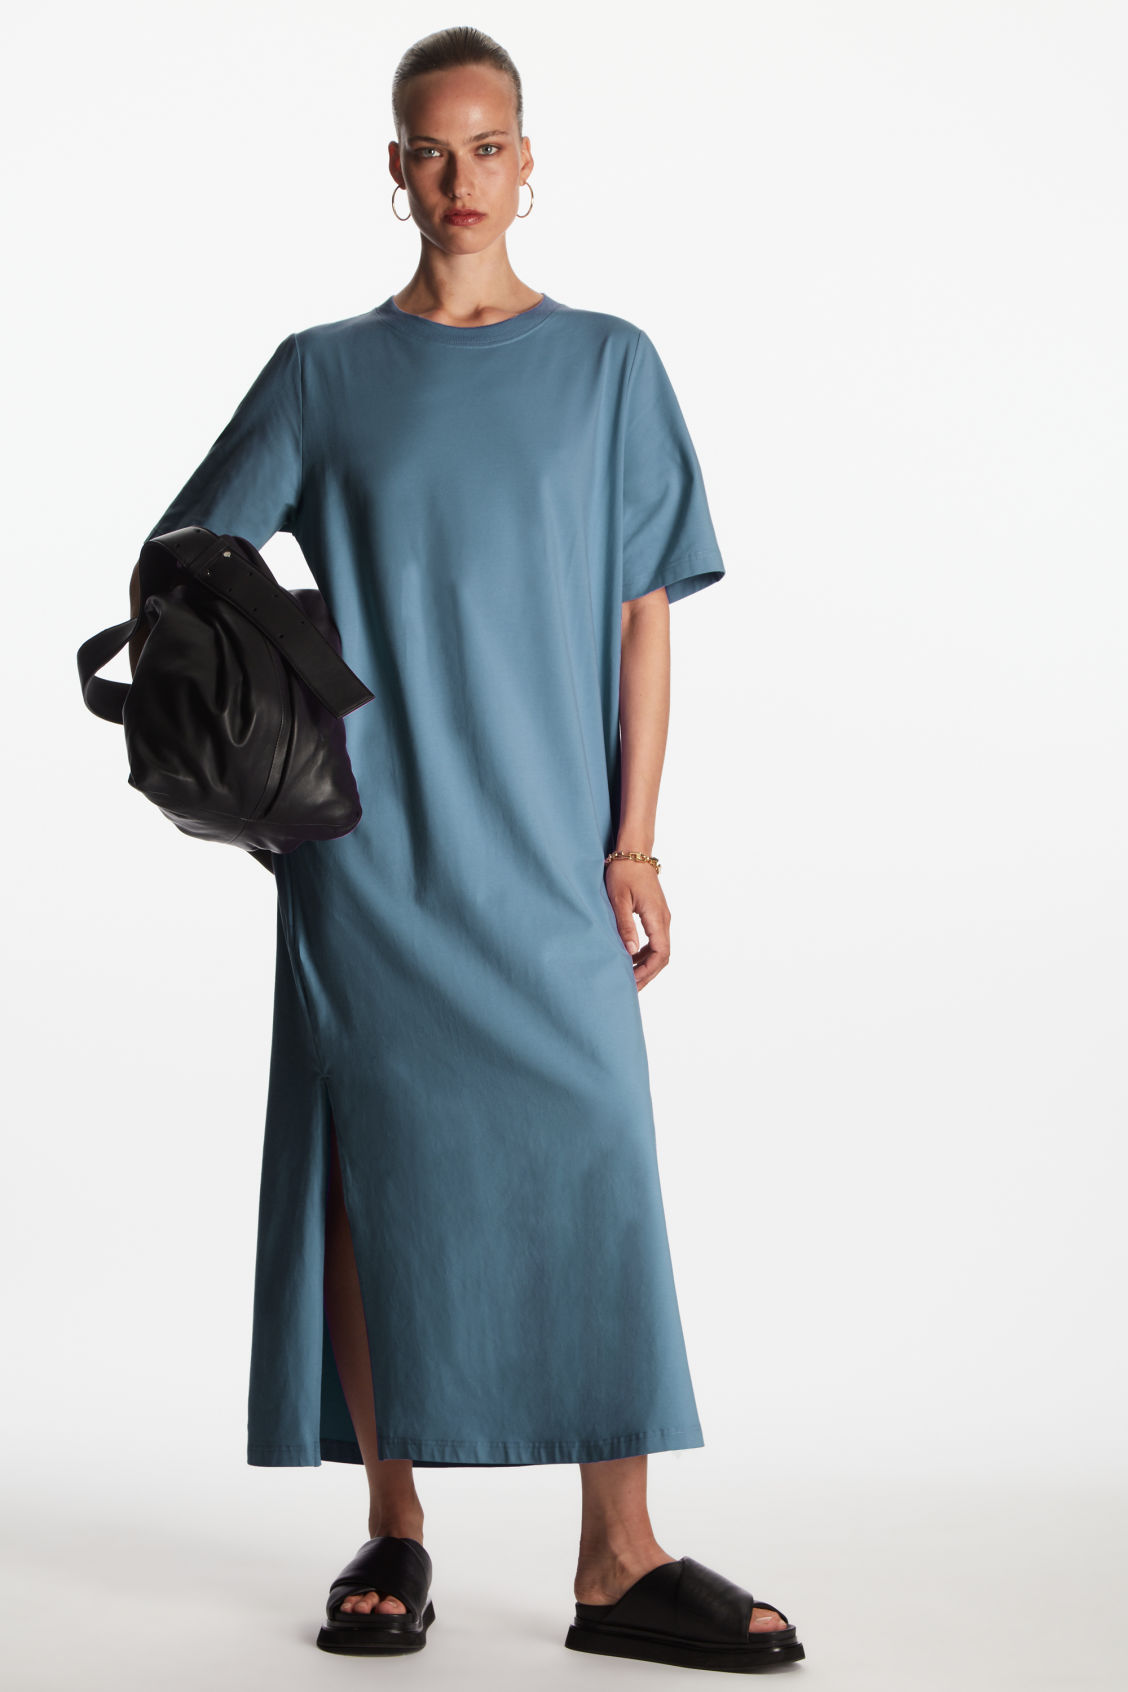 We Predict This £59 Throw-On Dress Will Be So Popular | Who What Wear UK